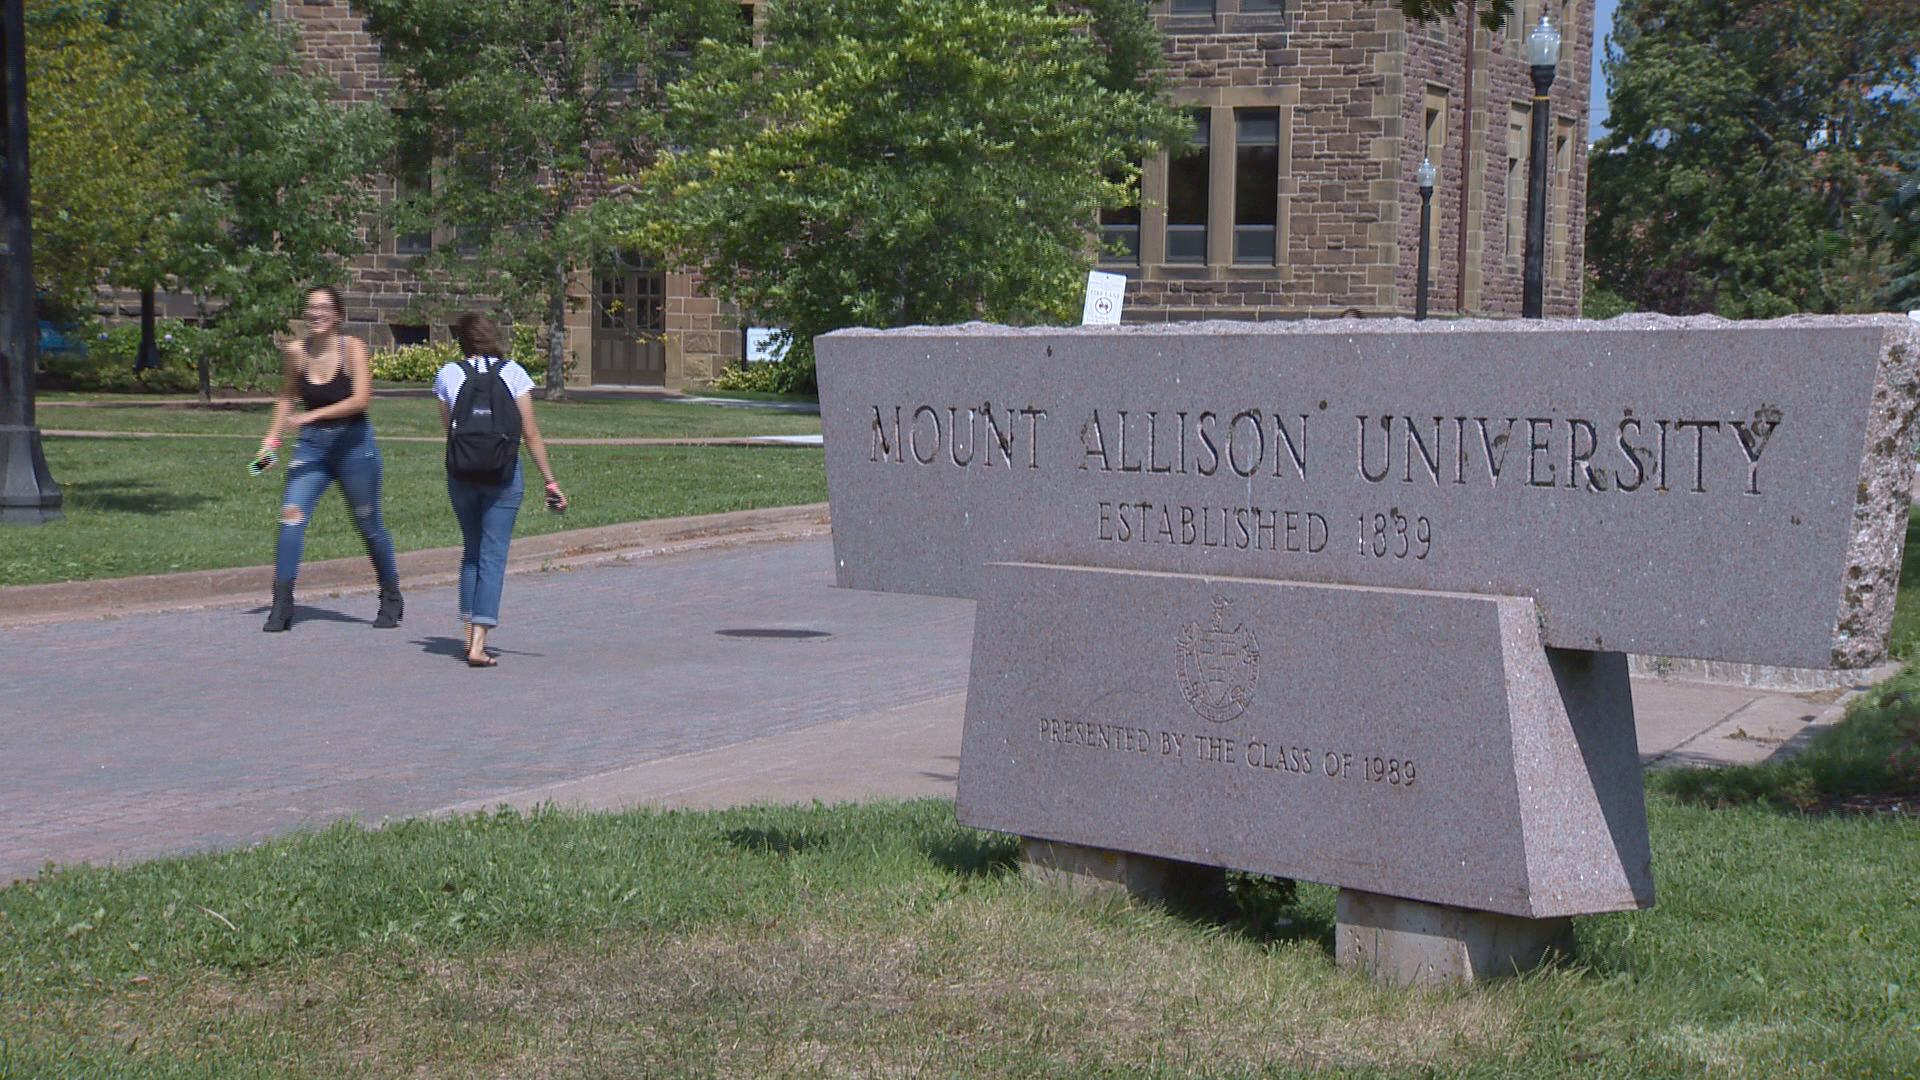 Centre for Black students at Mount Allison University targeted by hate speech